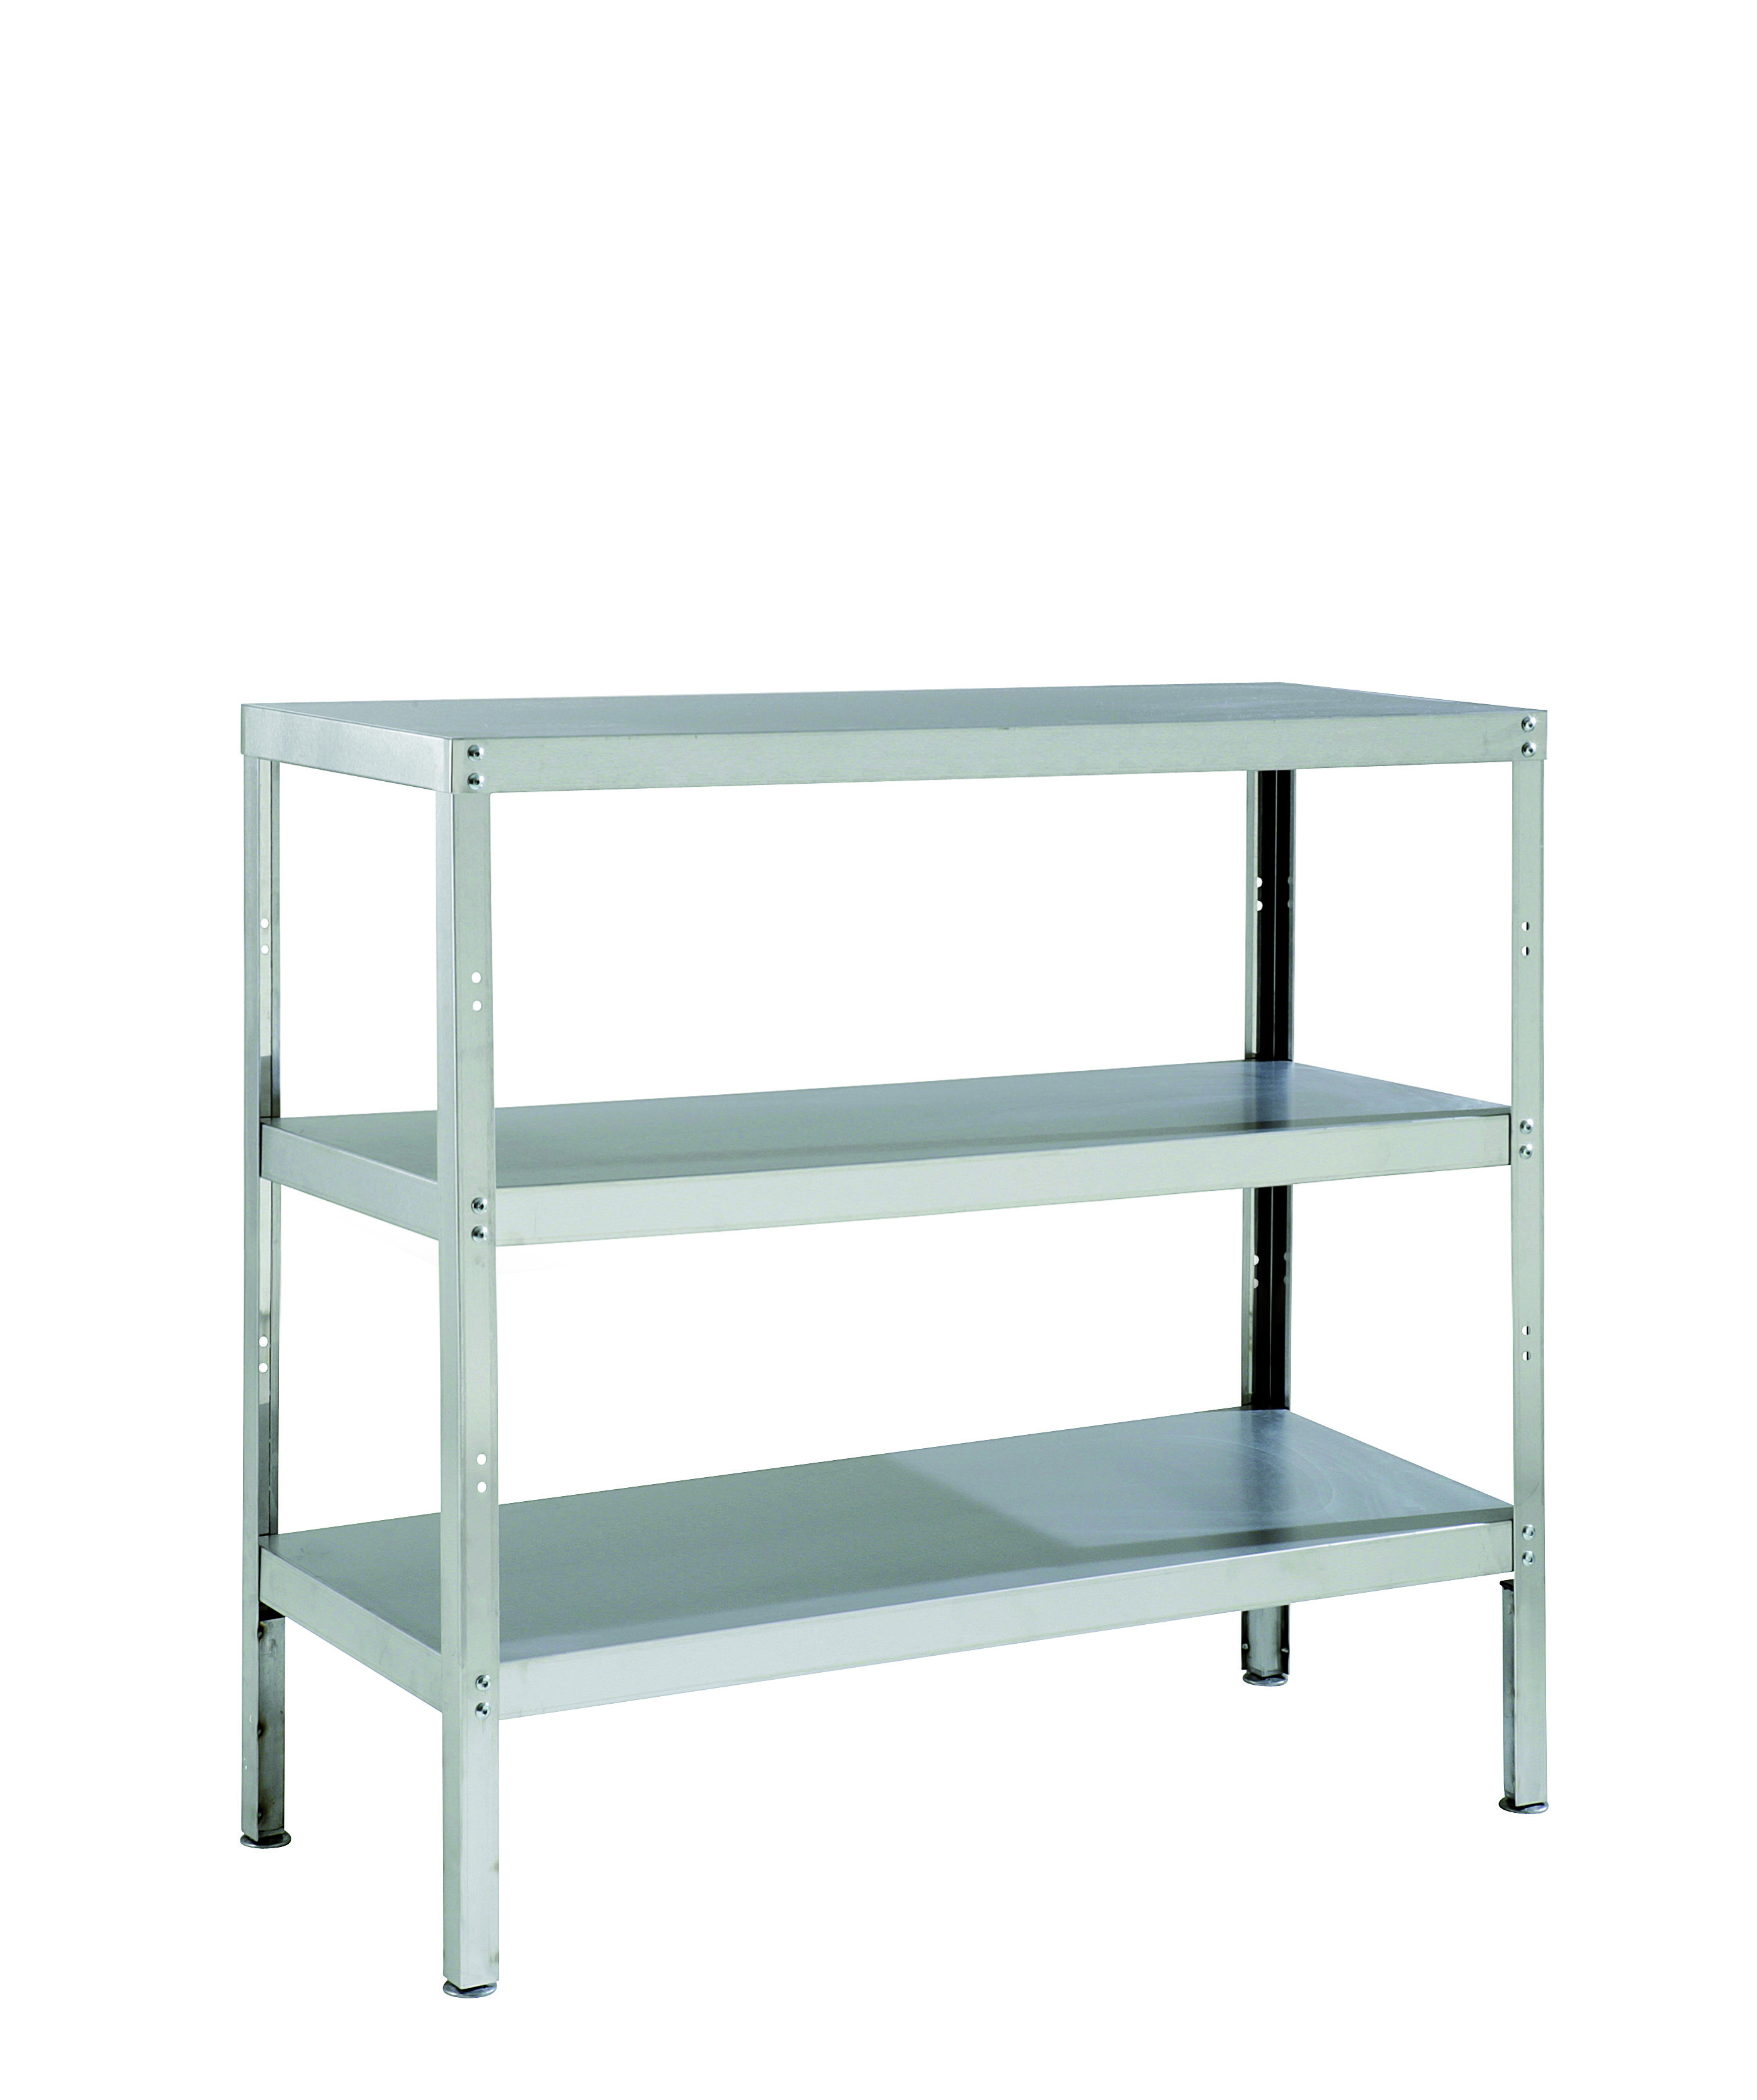 Parry RACK3S - Stainless Steel Storage Rack With 3 Shelves And Adjustable Feet